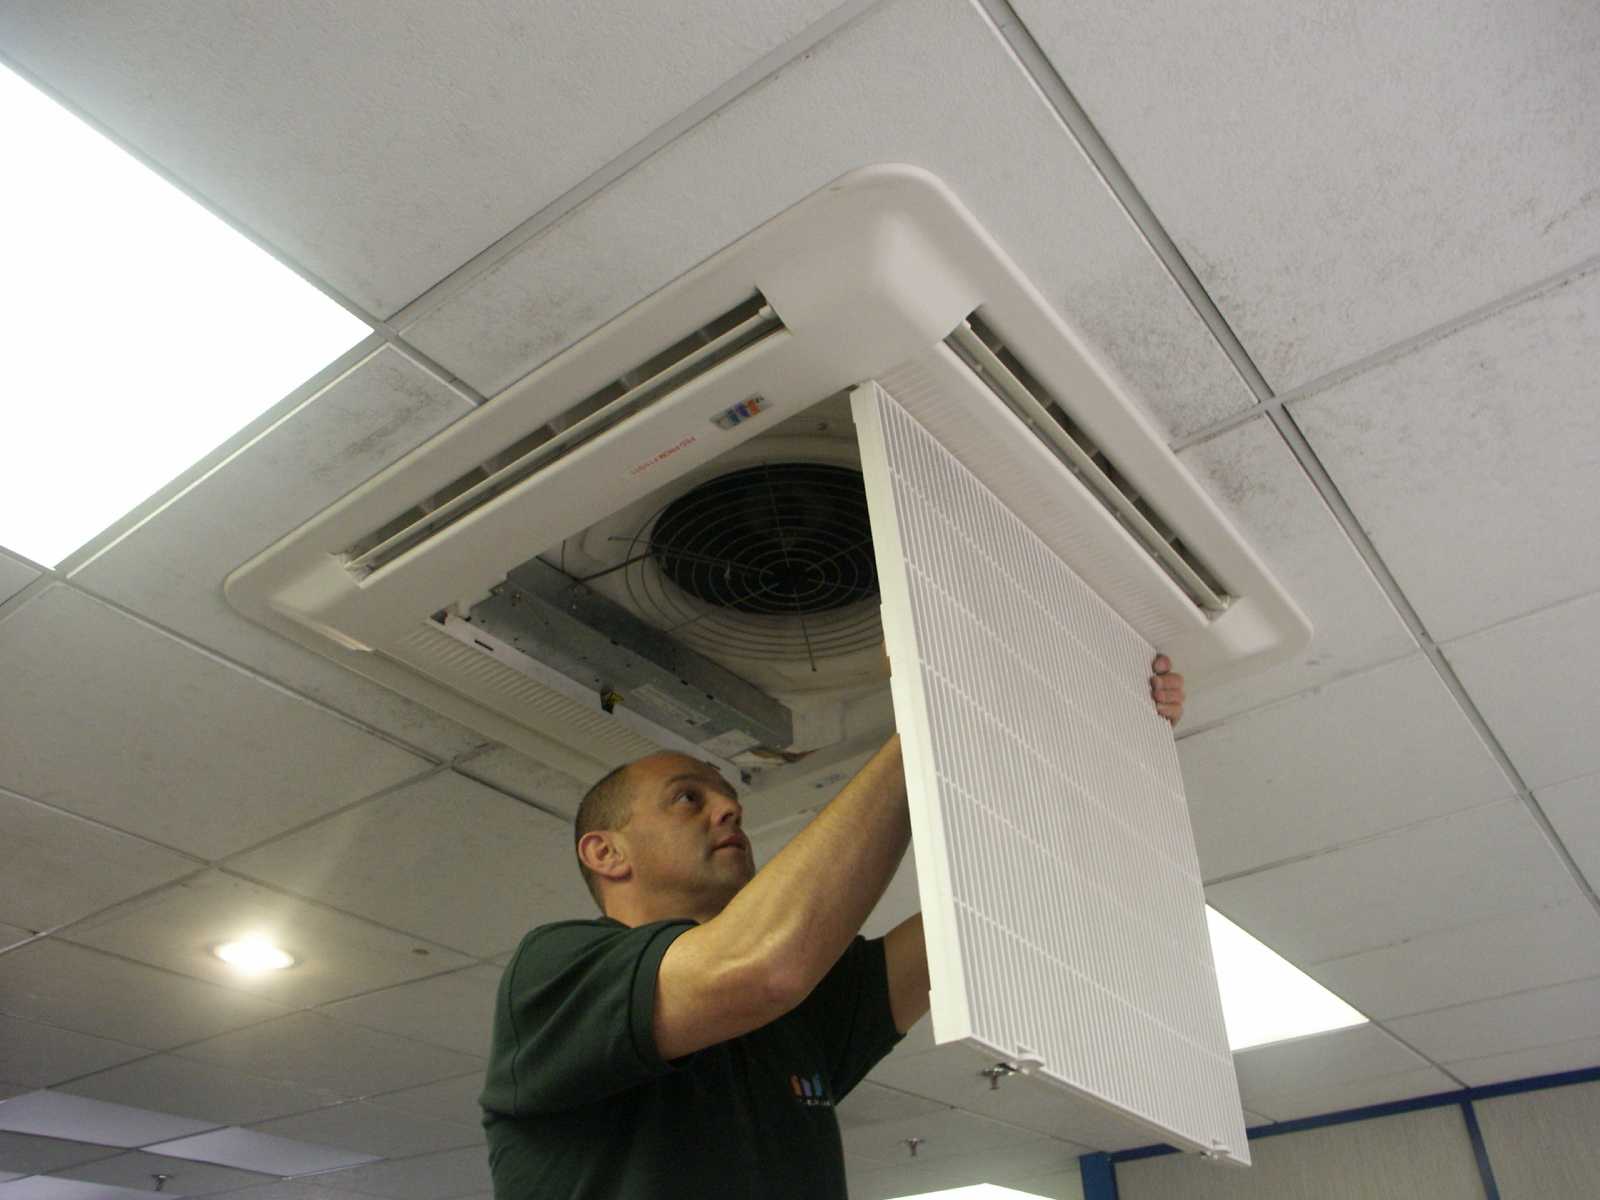 Cleaning aircon